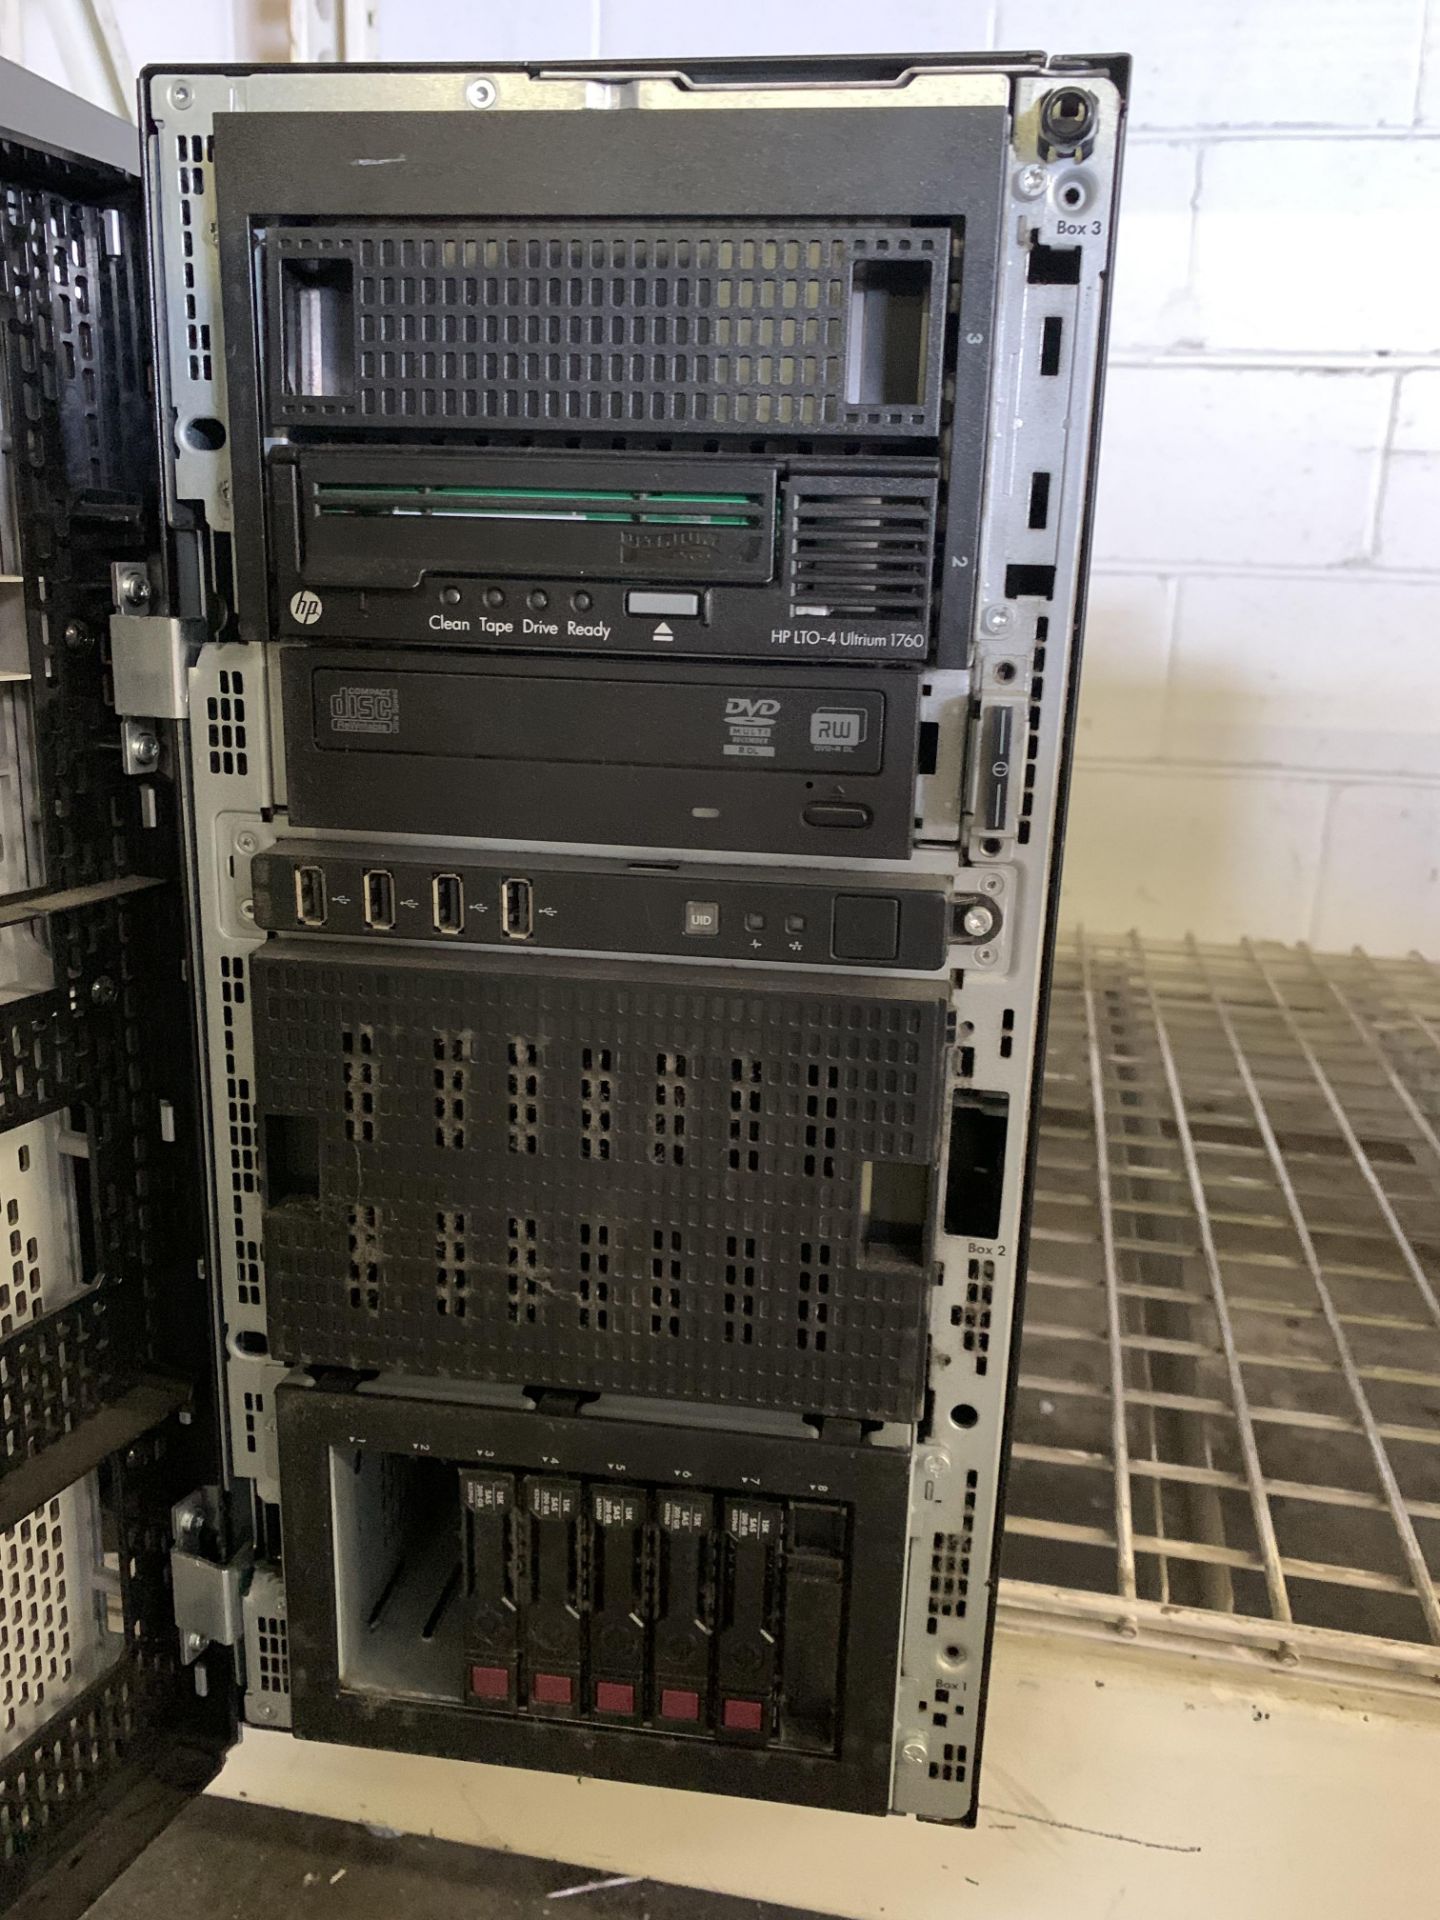 HP PROLLIANT ML350P GEN8 SERVER WITH (5) 300GB HARD DRIVES AND AN HP LTO-4 ULTRIUM 1760